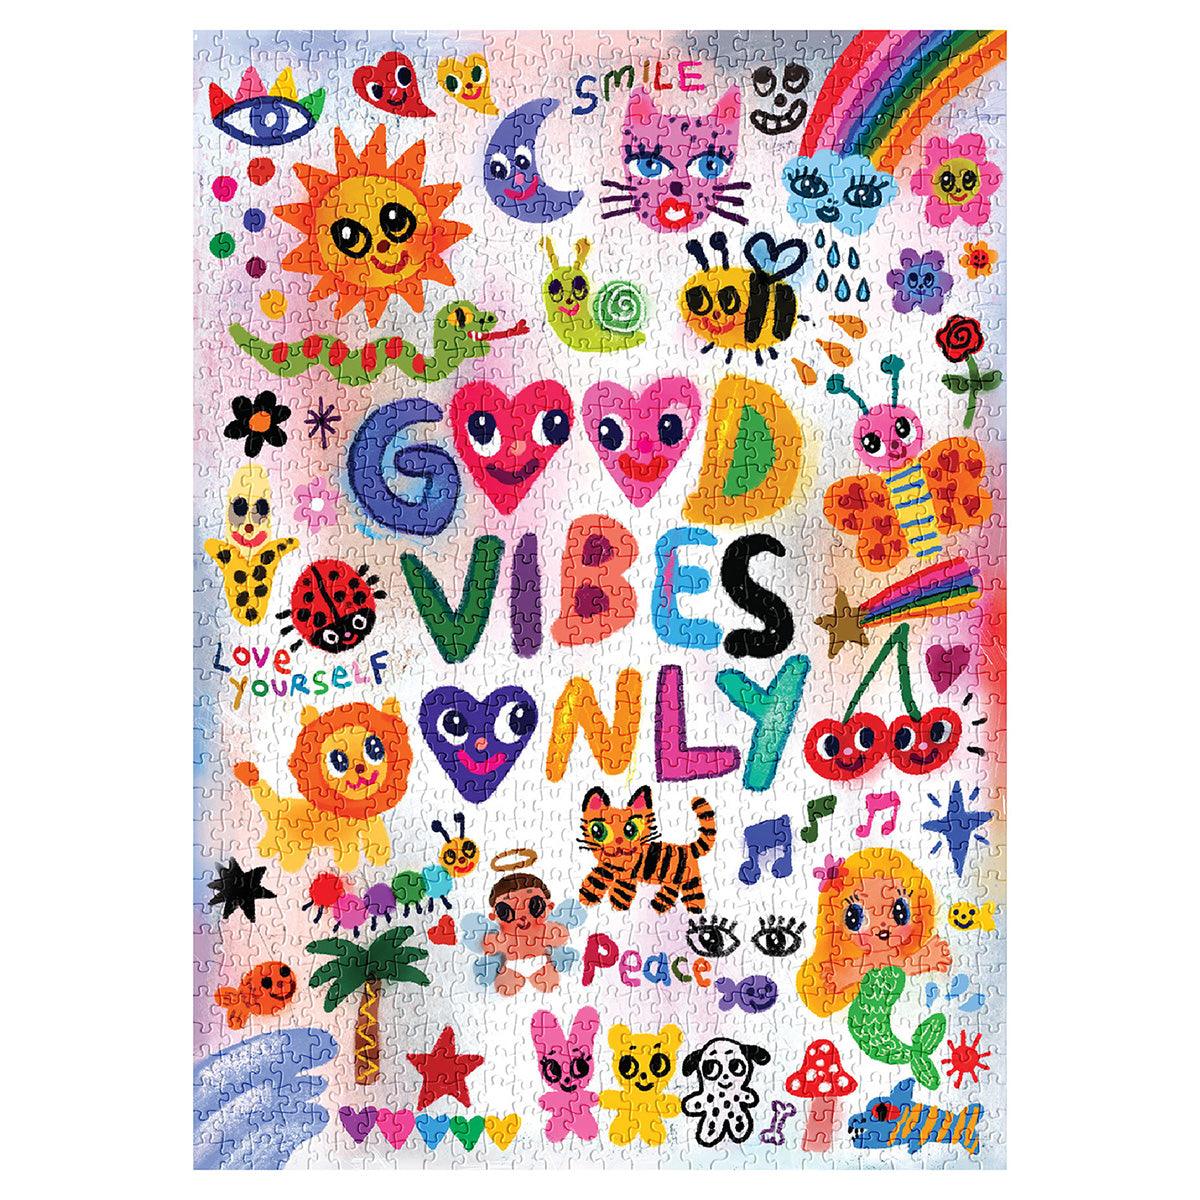 SOONNESS 1000 piece puzzle Good Vibes Only by Humberto Cruz iscreamcolour Karol G